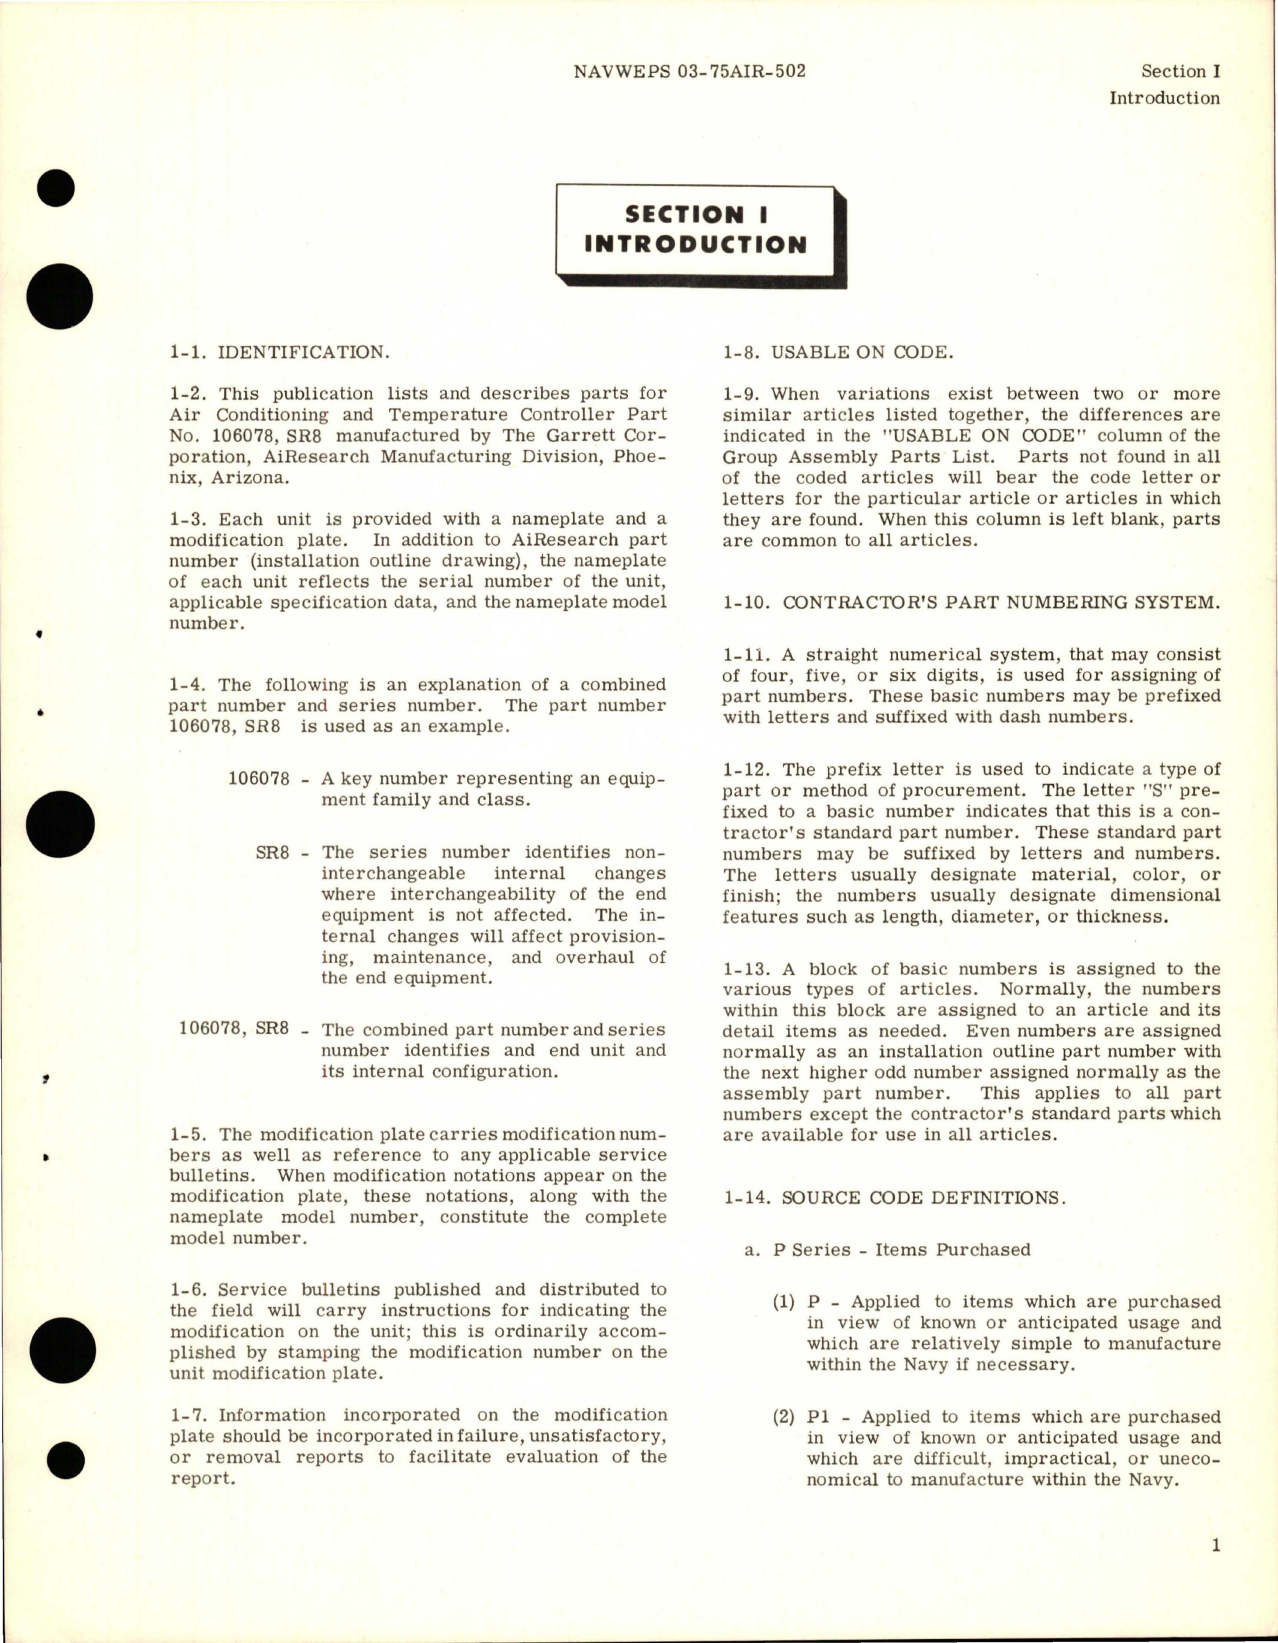 Sample page 5 from AirCorps Library document: Illustrated Parts Breakdown for Air Conditioning and Temperature Controller - Part 106078 and SR8